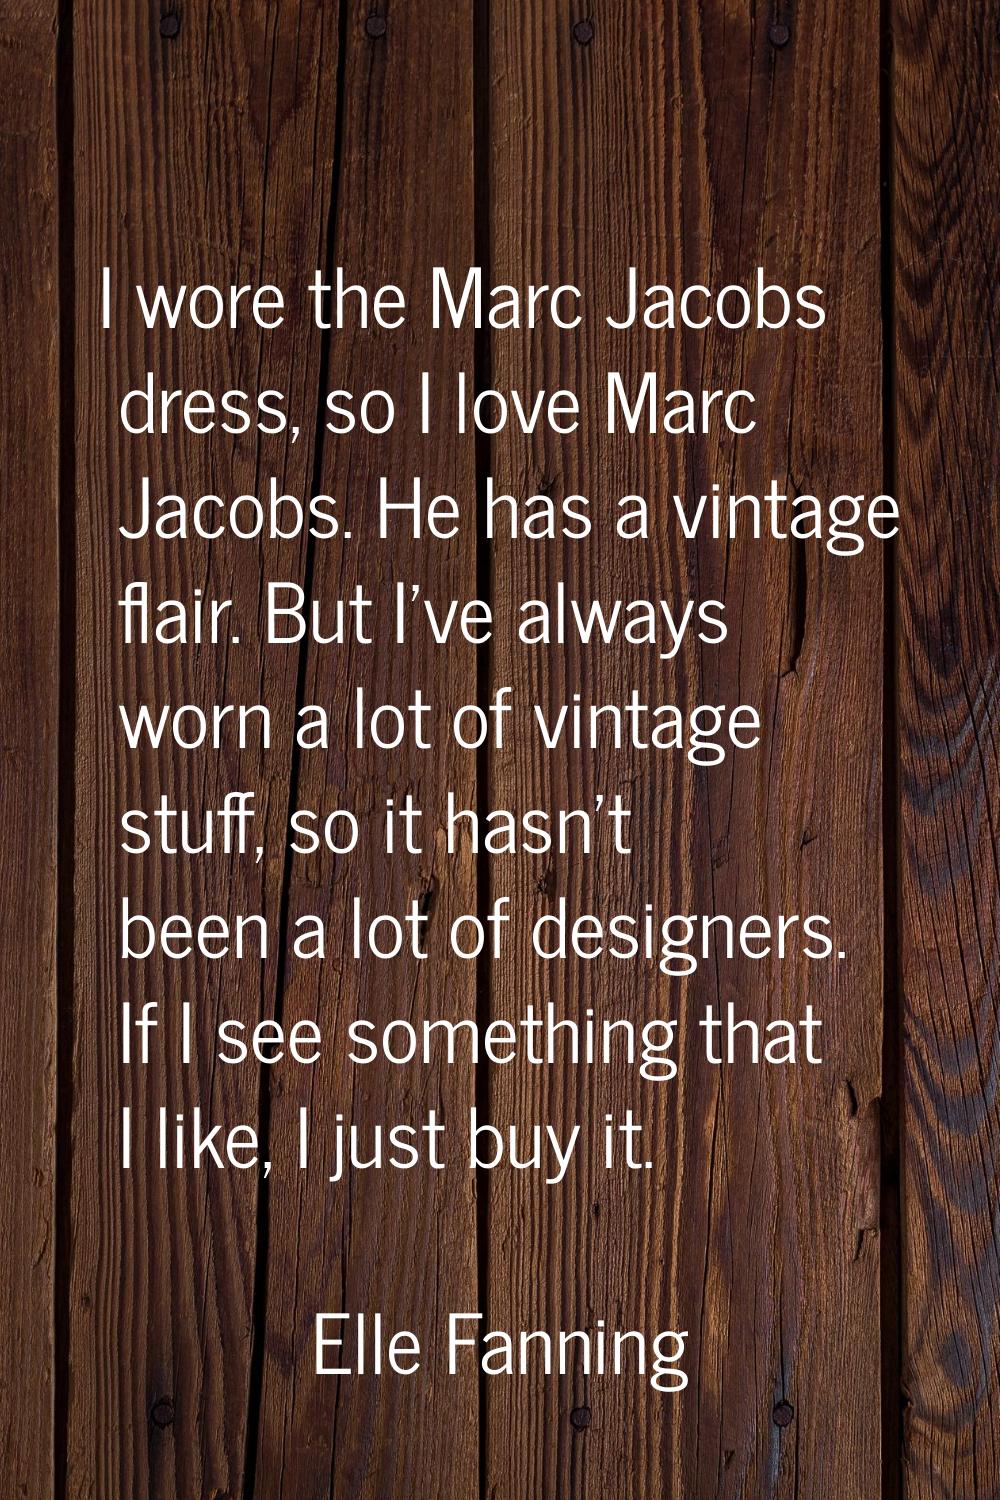 I wore the Marc Jacobs dress, so I love Marc Jacobs. He has a vintage flair. But I've always worn a